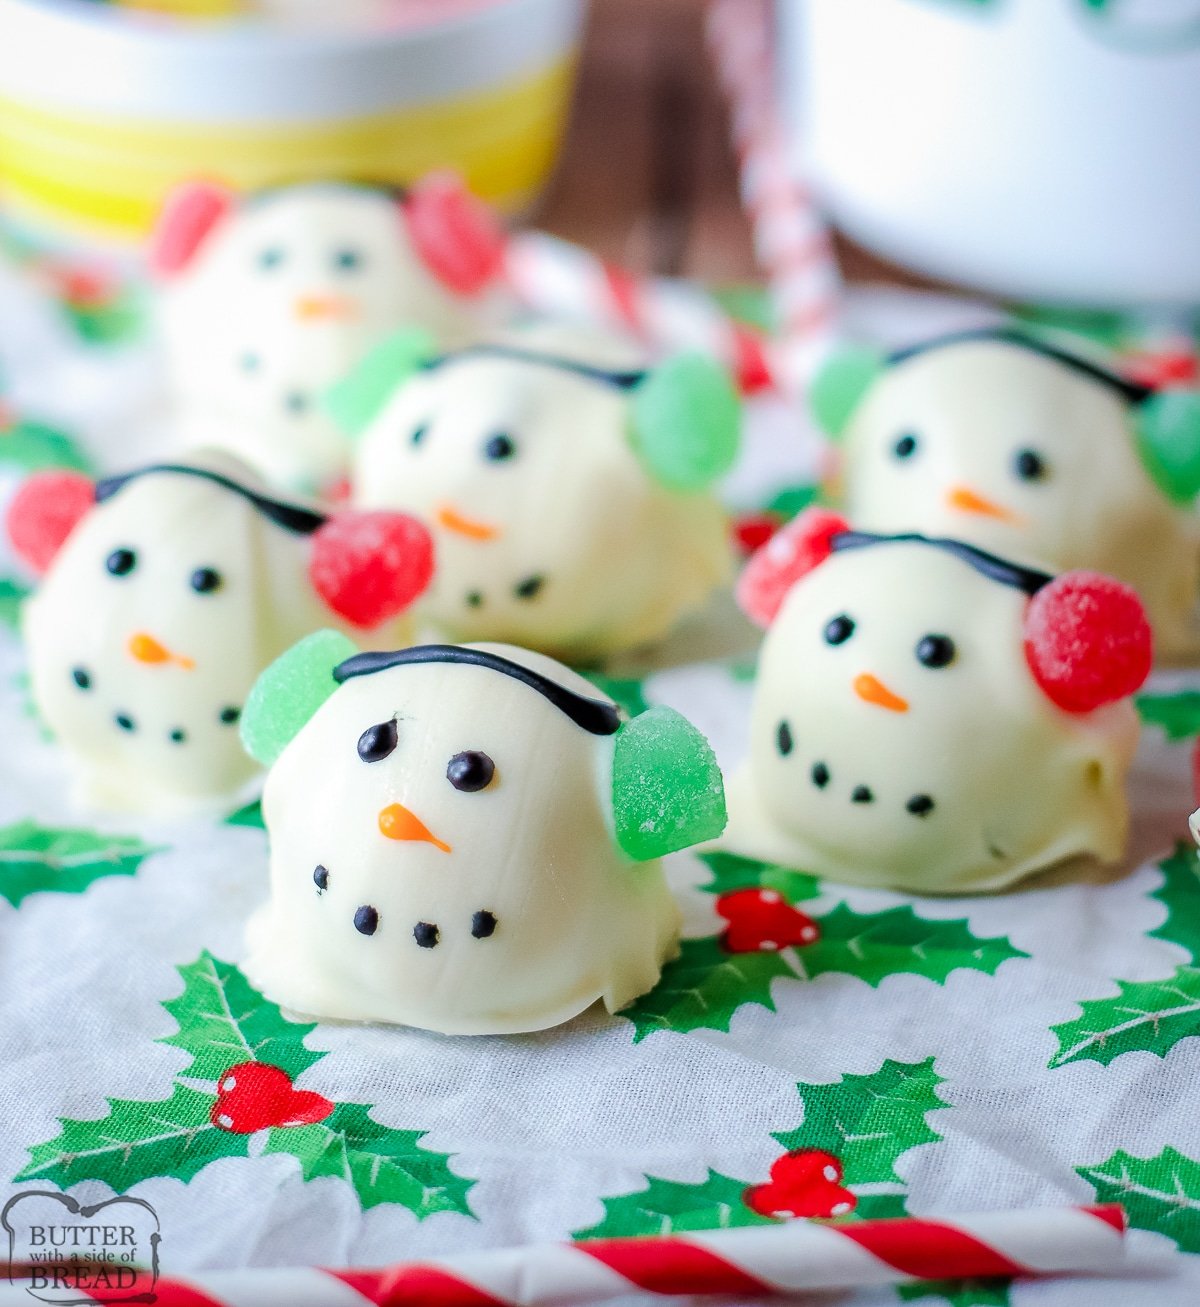 cute snowman brownie bites with white chocolate